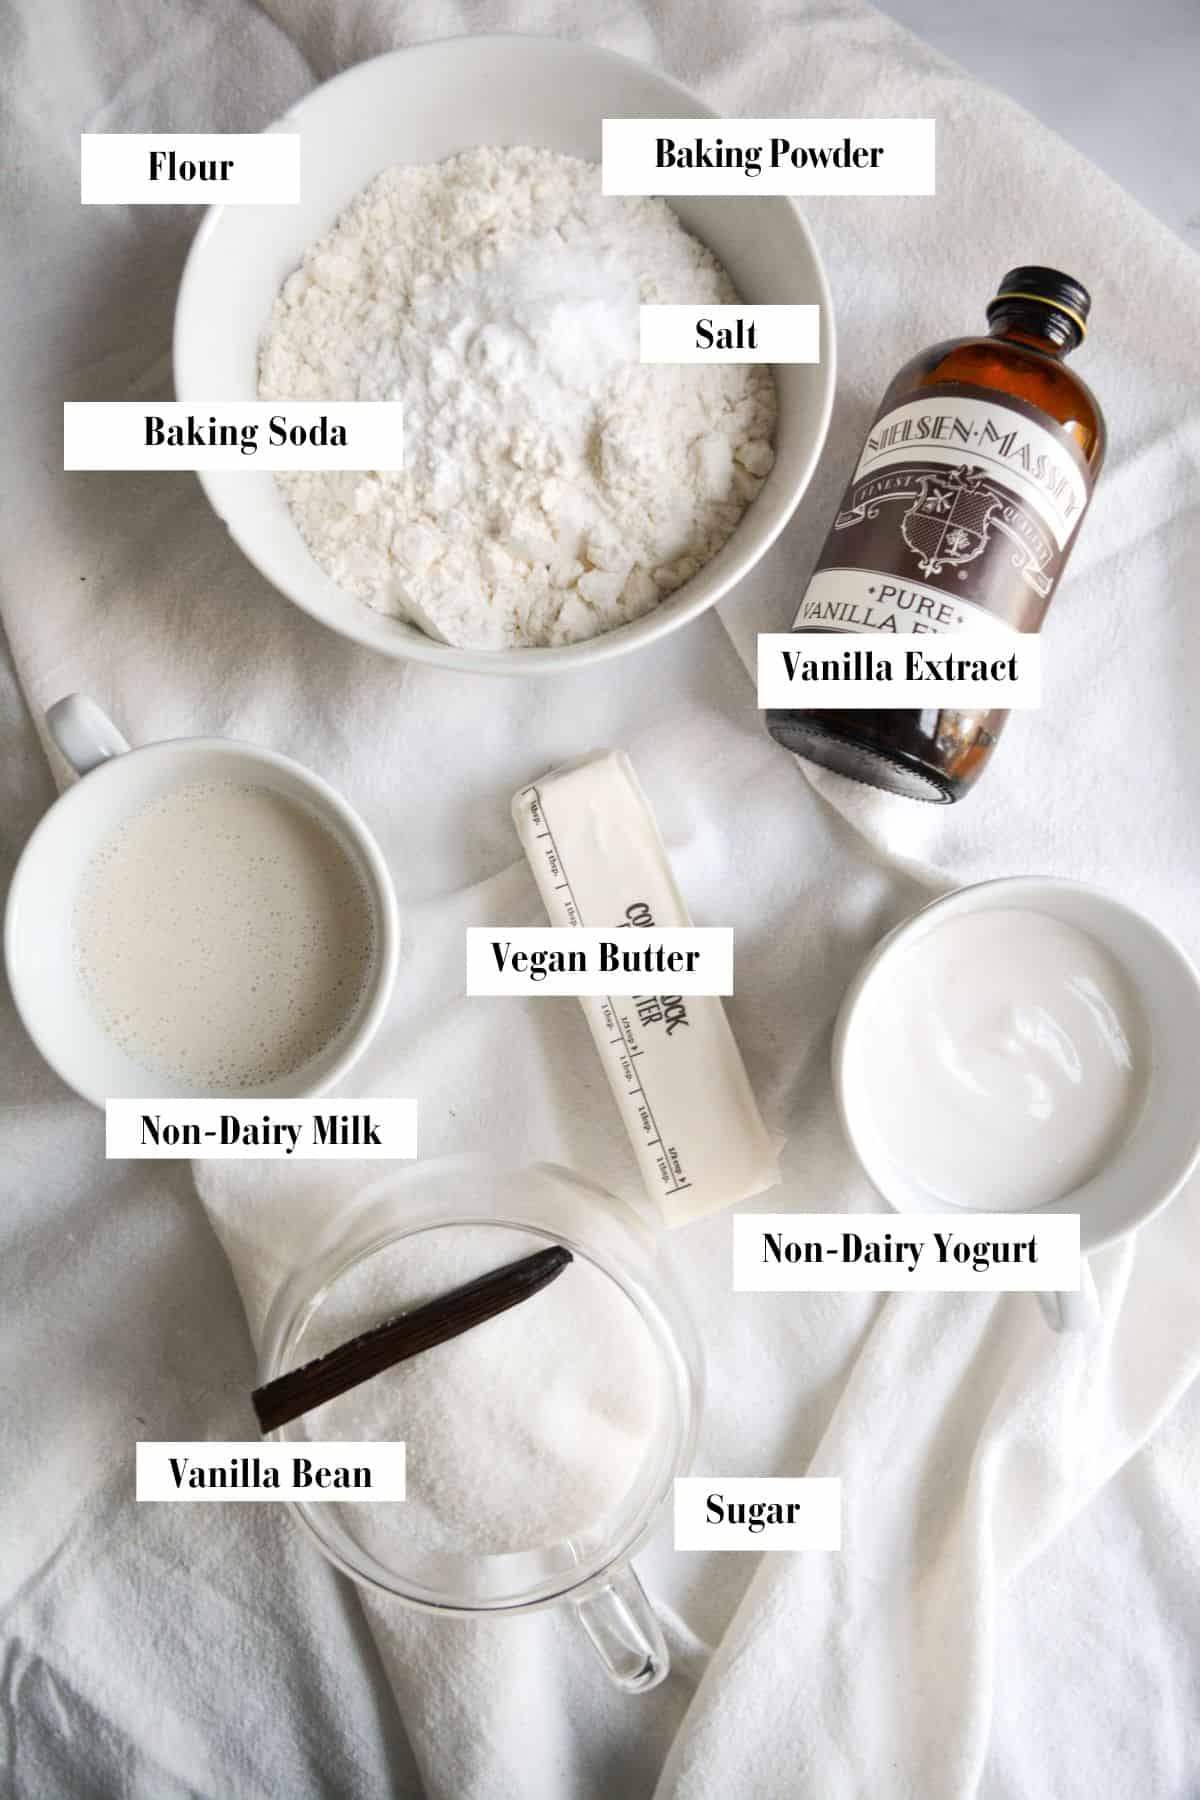 Overhead photo of ingredients to make the pound cake.